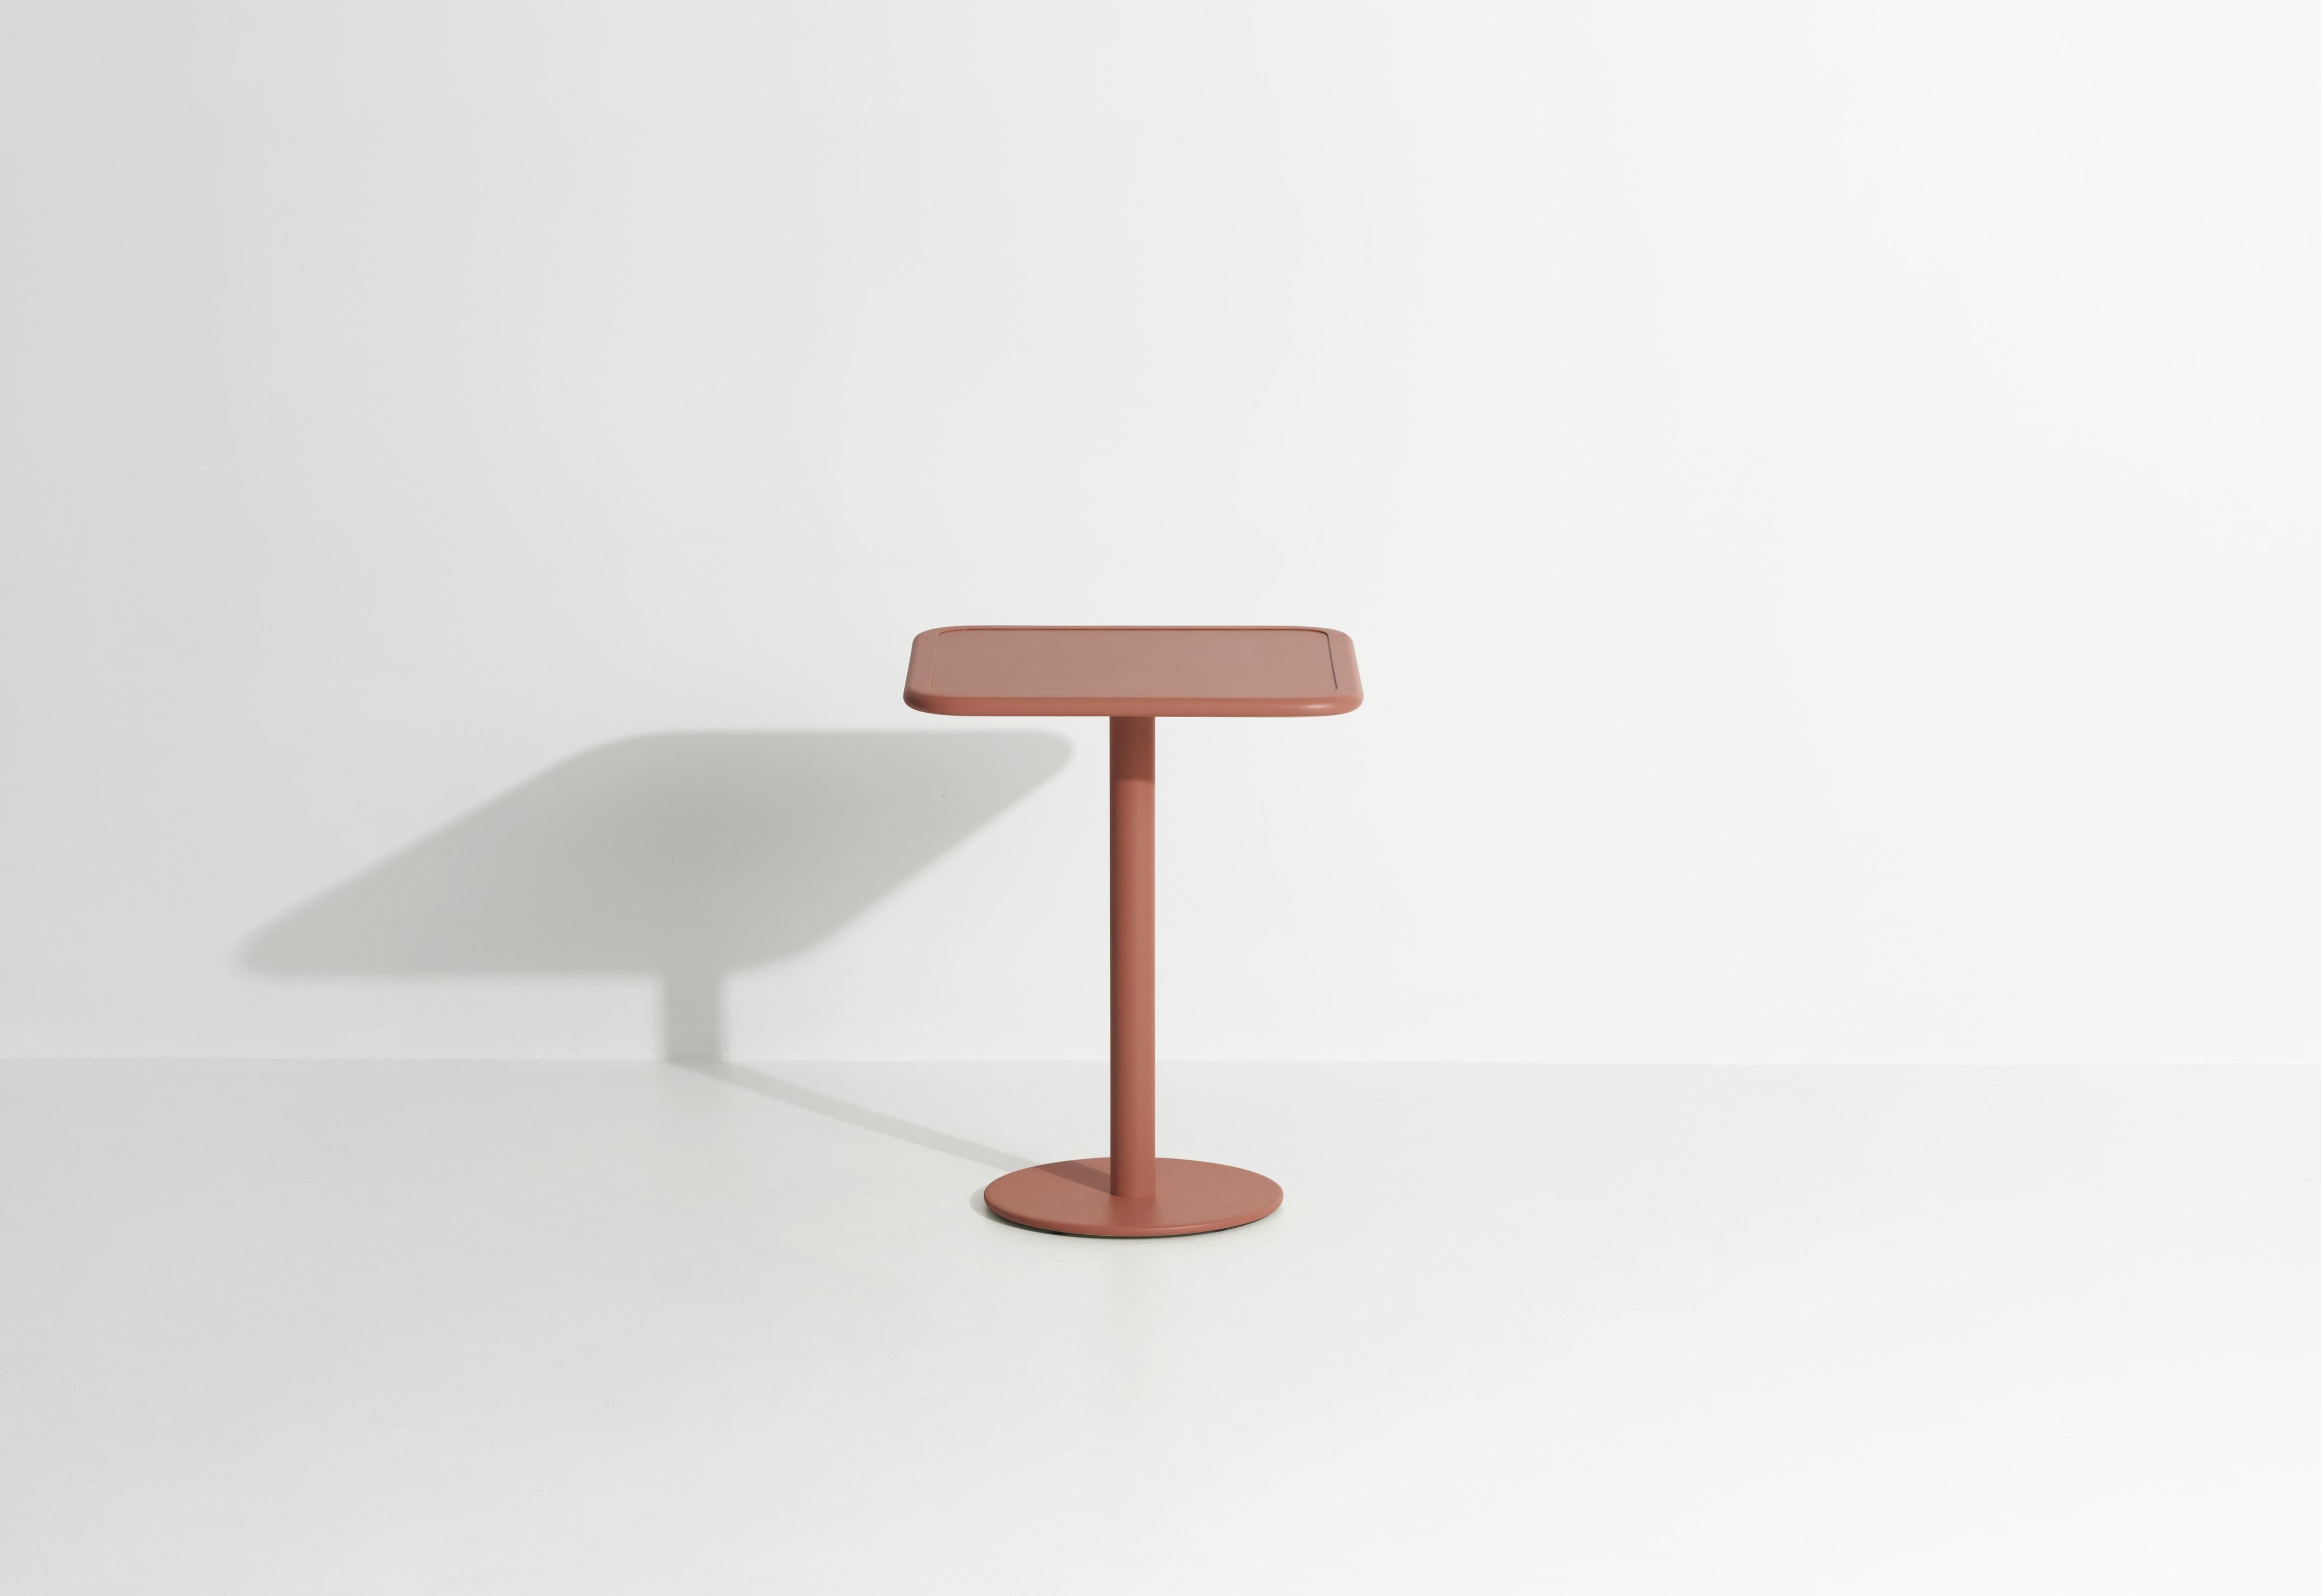 Petite Friture Week-End Bistro Square Dining Table in Terracotta Aluminium by Studio BrichetZiegler, 2017

The week-end collection is a full range of outdoor furniture, in aluminium grained epoxy paint, matt finish, that includes 18 functions and